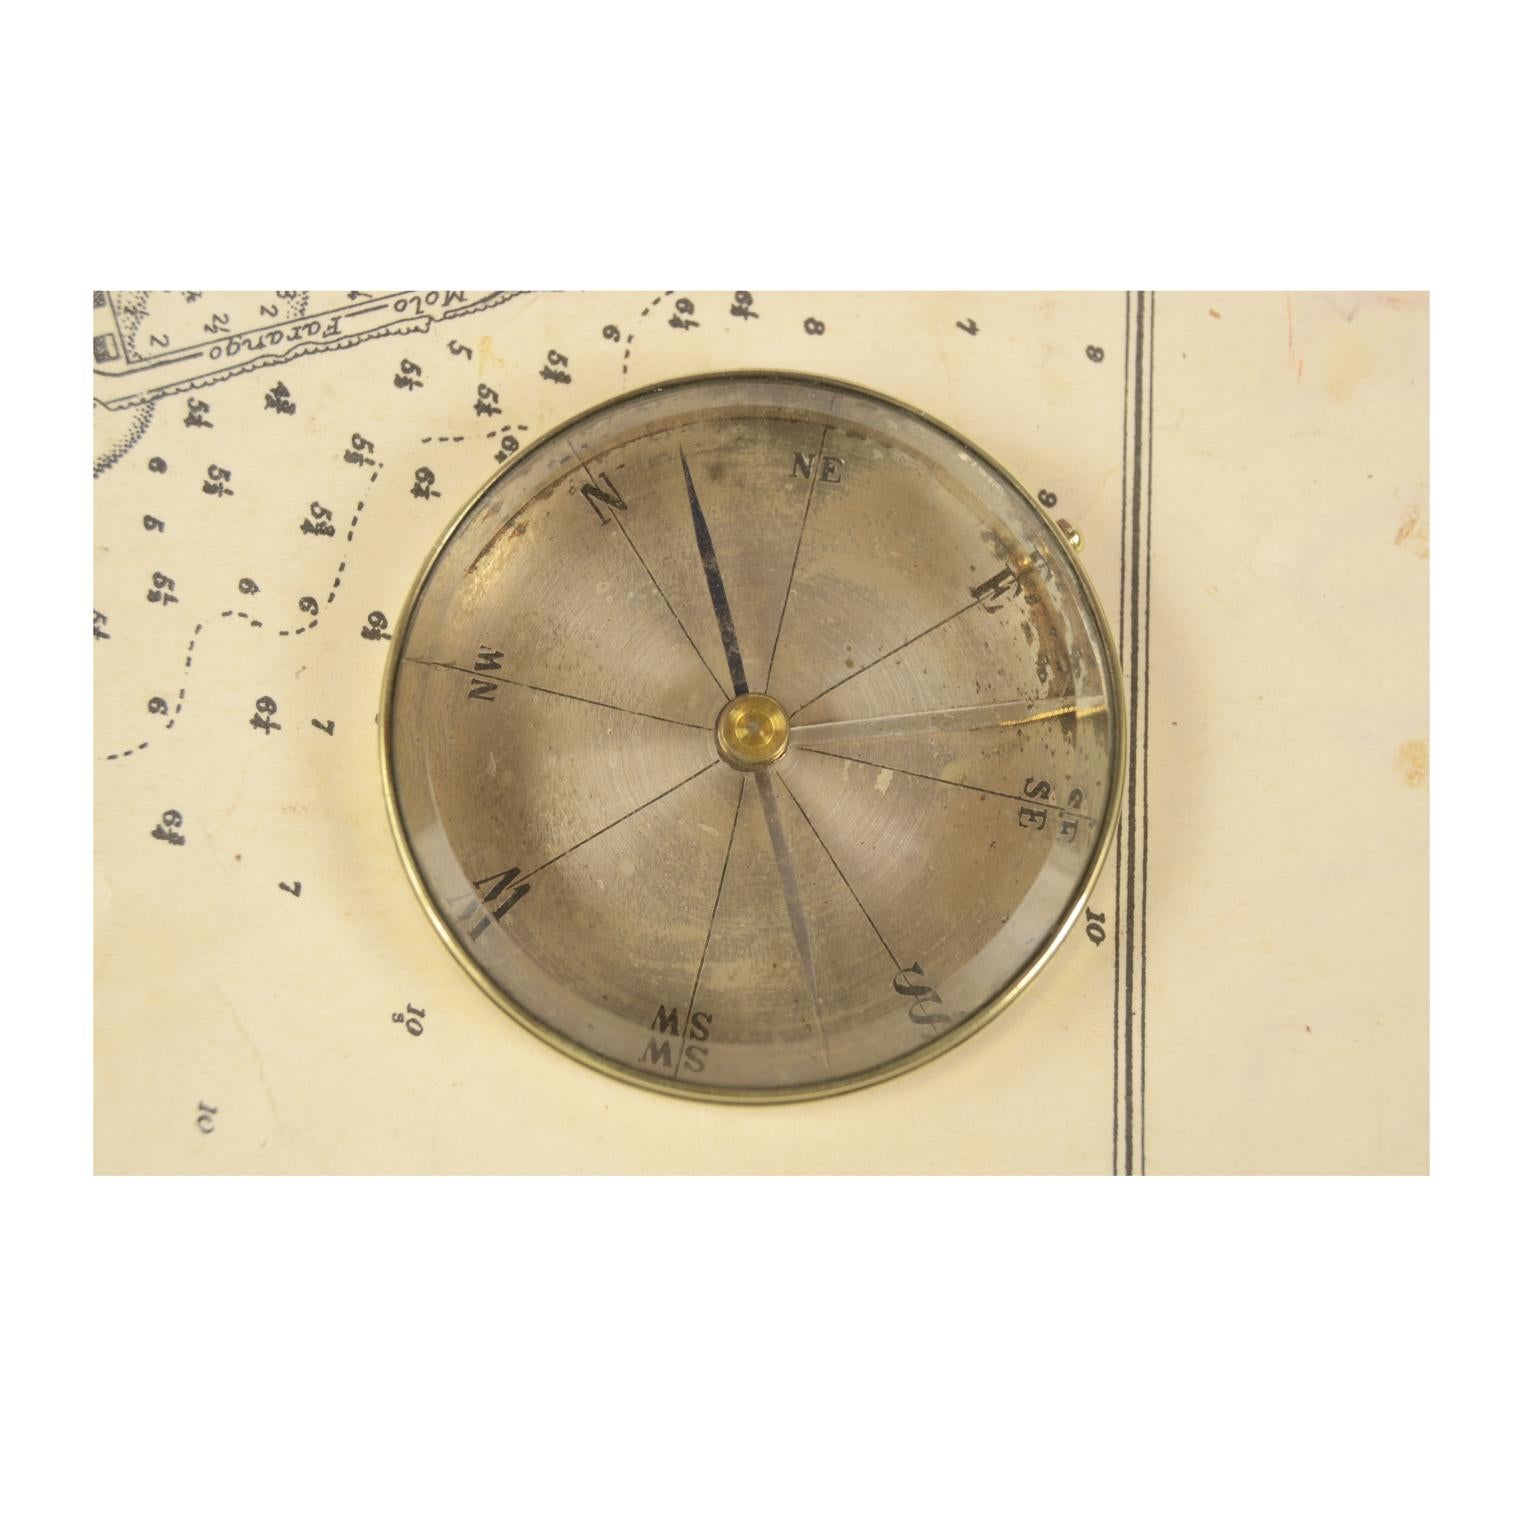 Small travel compass made of turned brass with lid, eight winds compass card of engraved and chromed brass, complete with needle block for calculating horizontal angles. French manufacture, early 1900s. Excellent condition, fully functional.